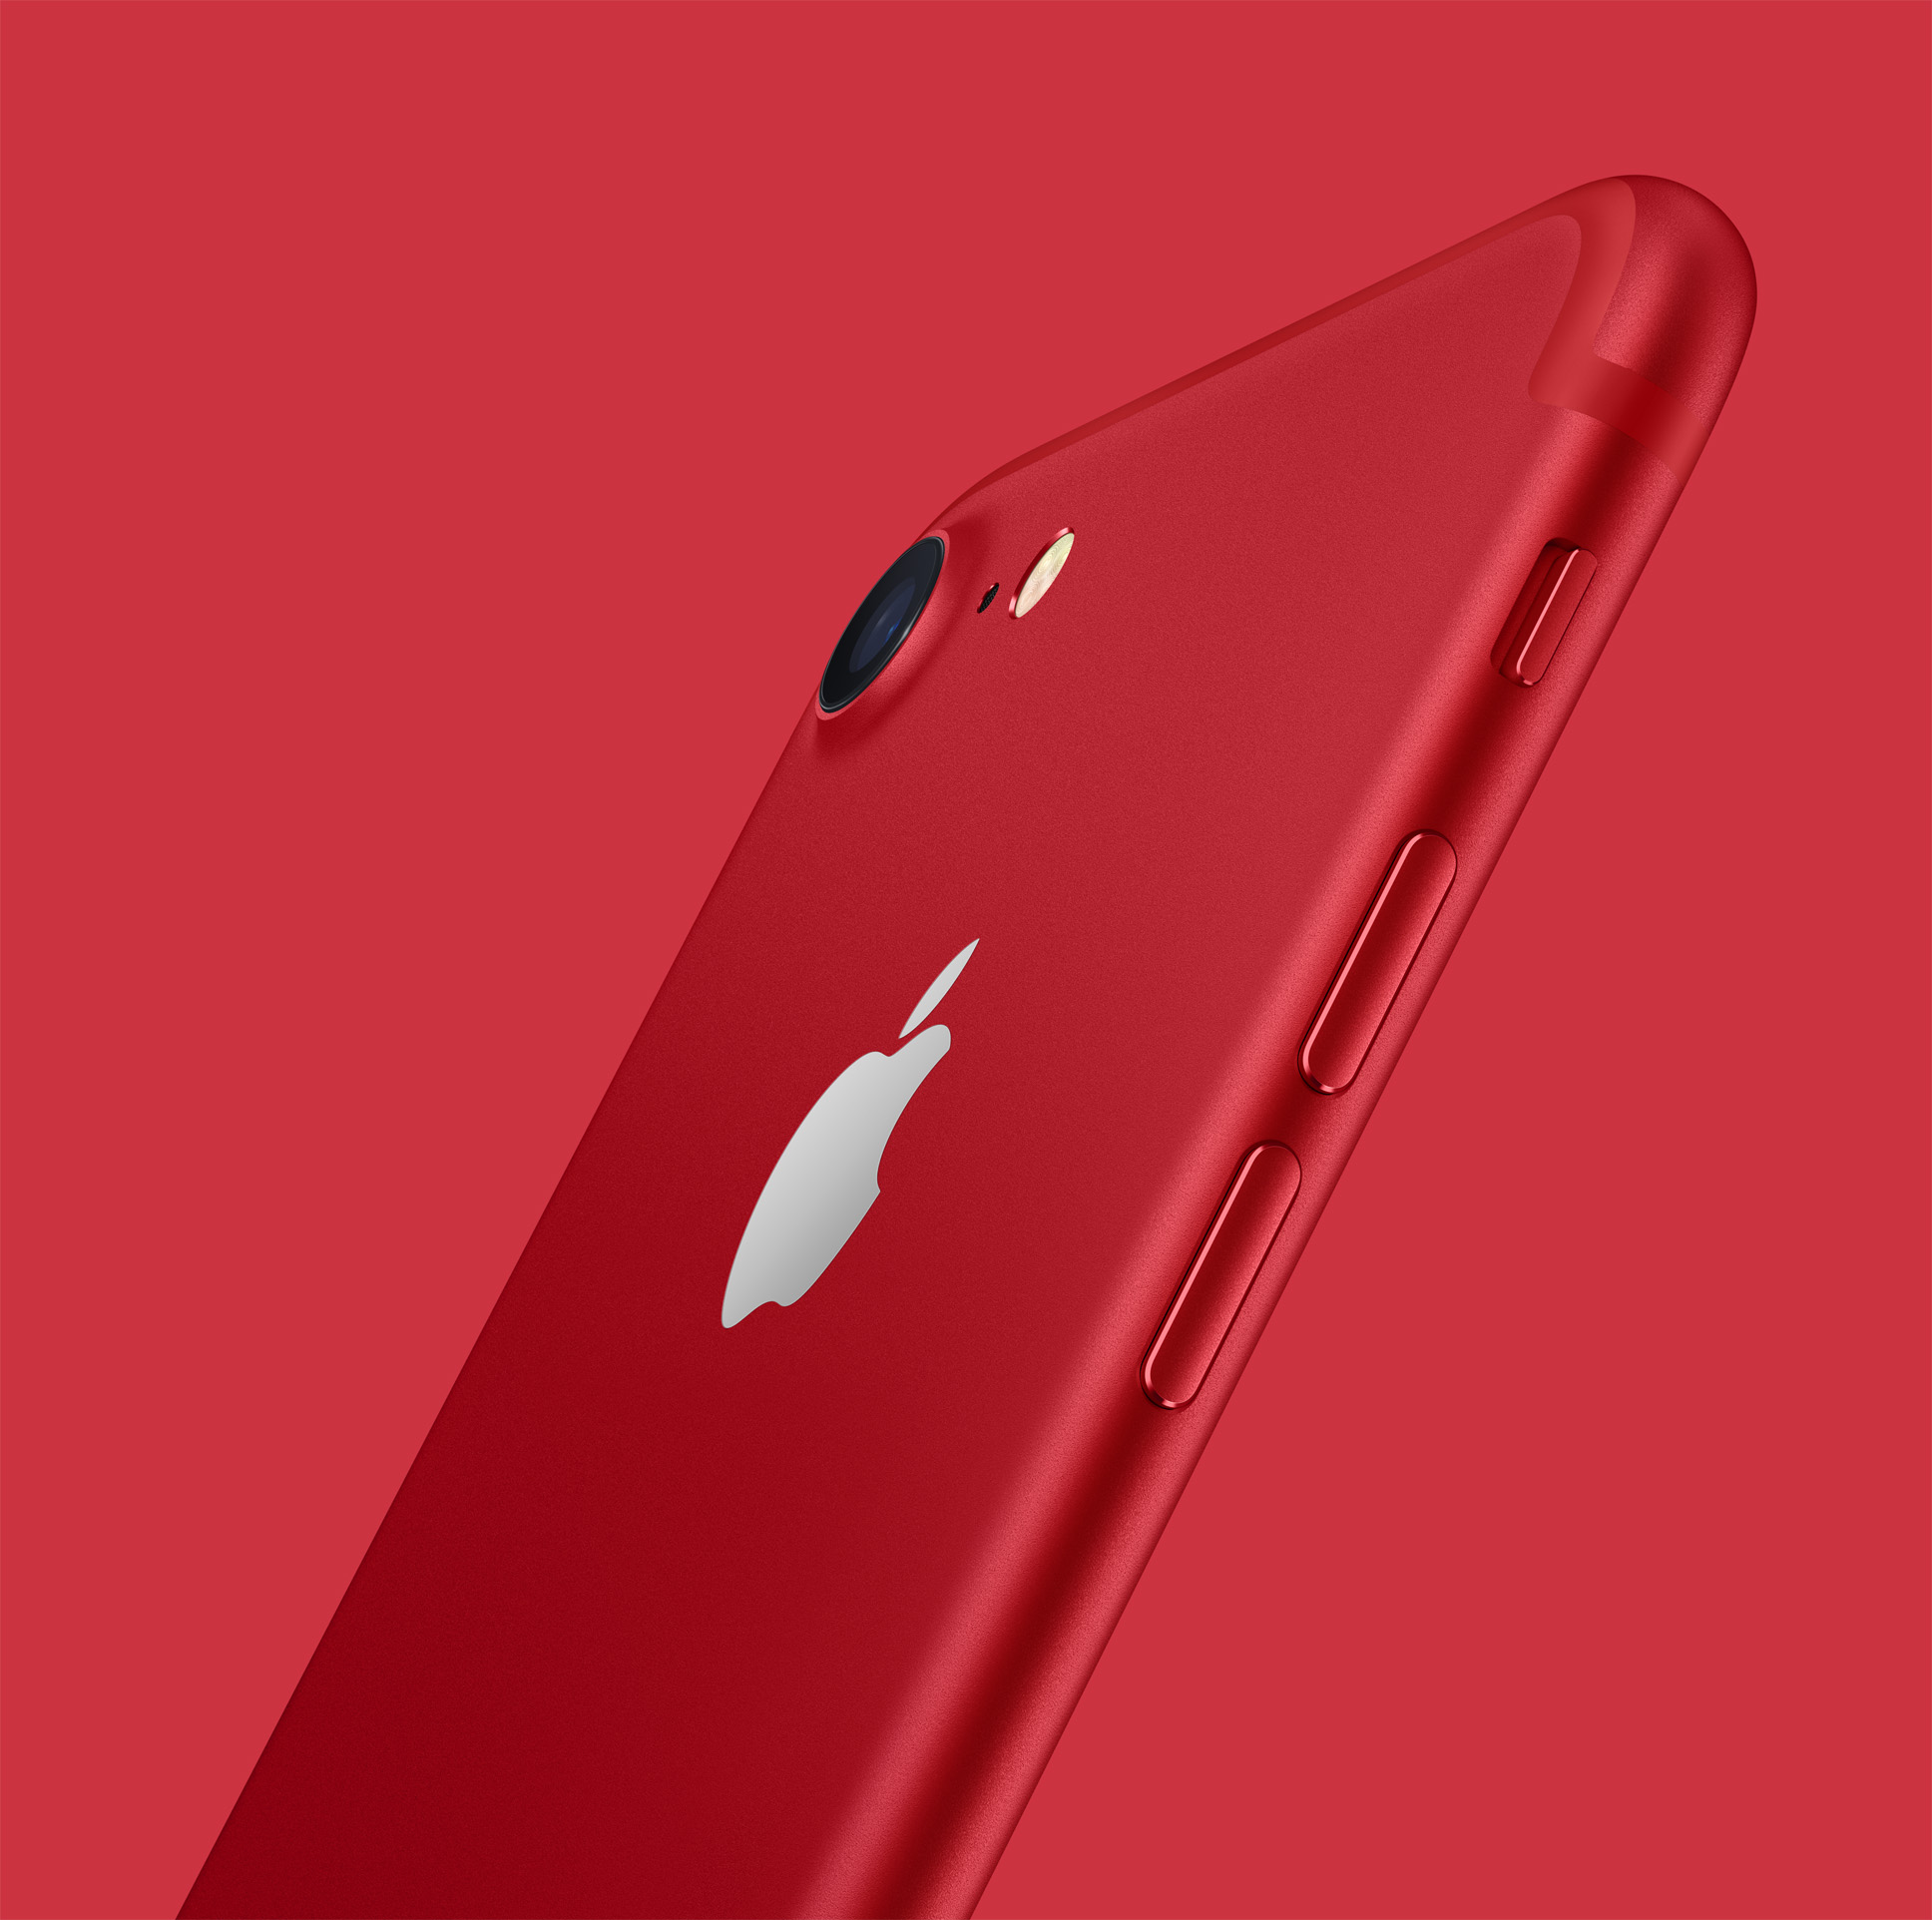 iPhone Product (RED)